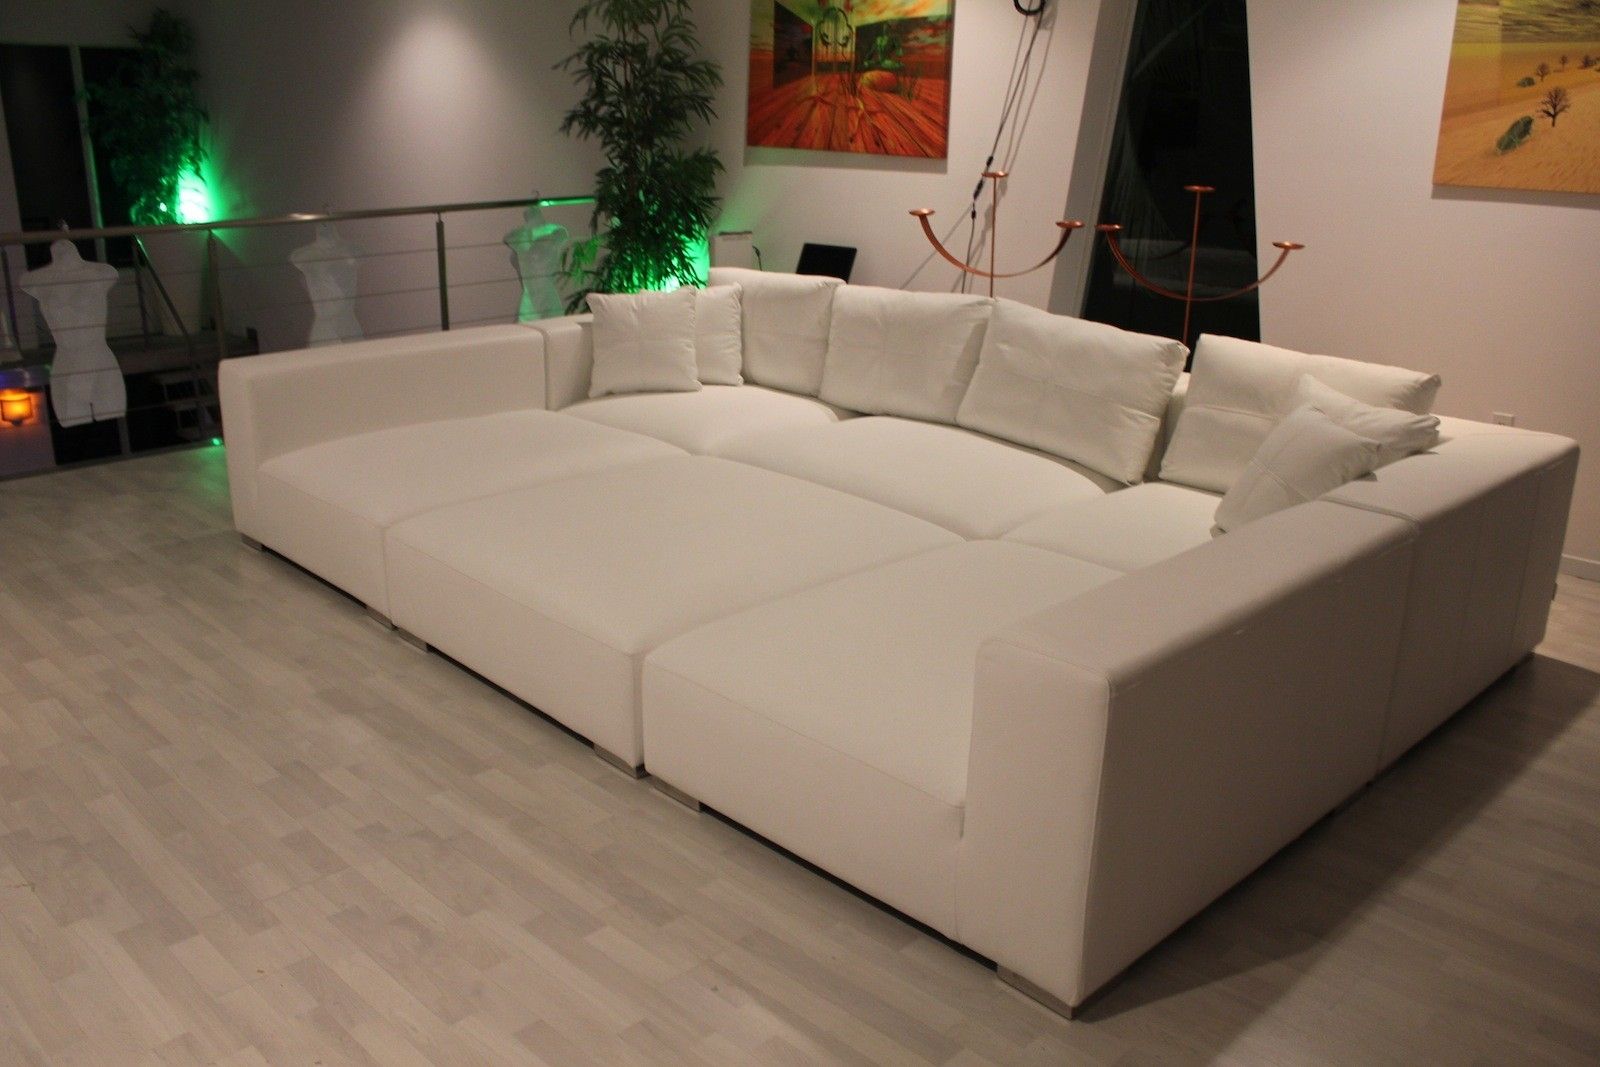 Amazing Pit Sectional Sofa 54 For Your Closeout Sectional Sofas Regarding Closeout Sectional Sofas (View 2 of 12)